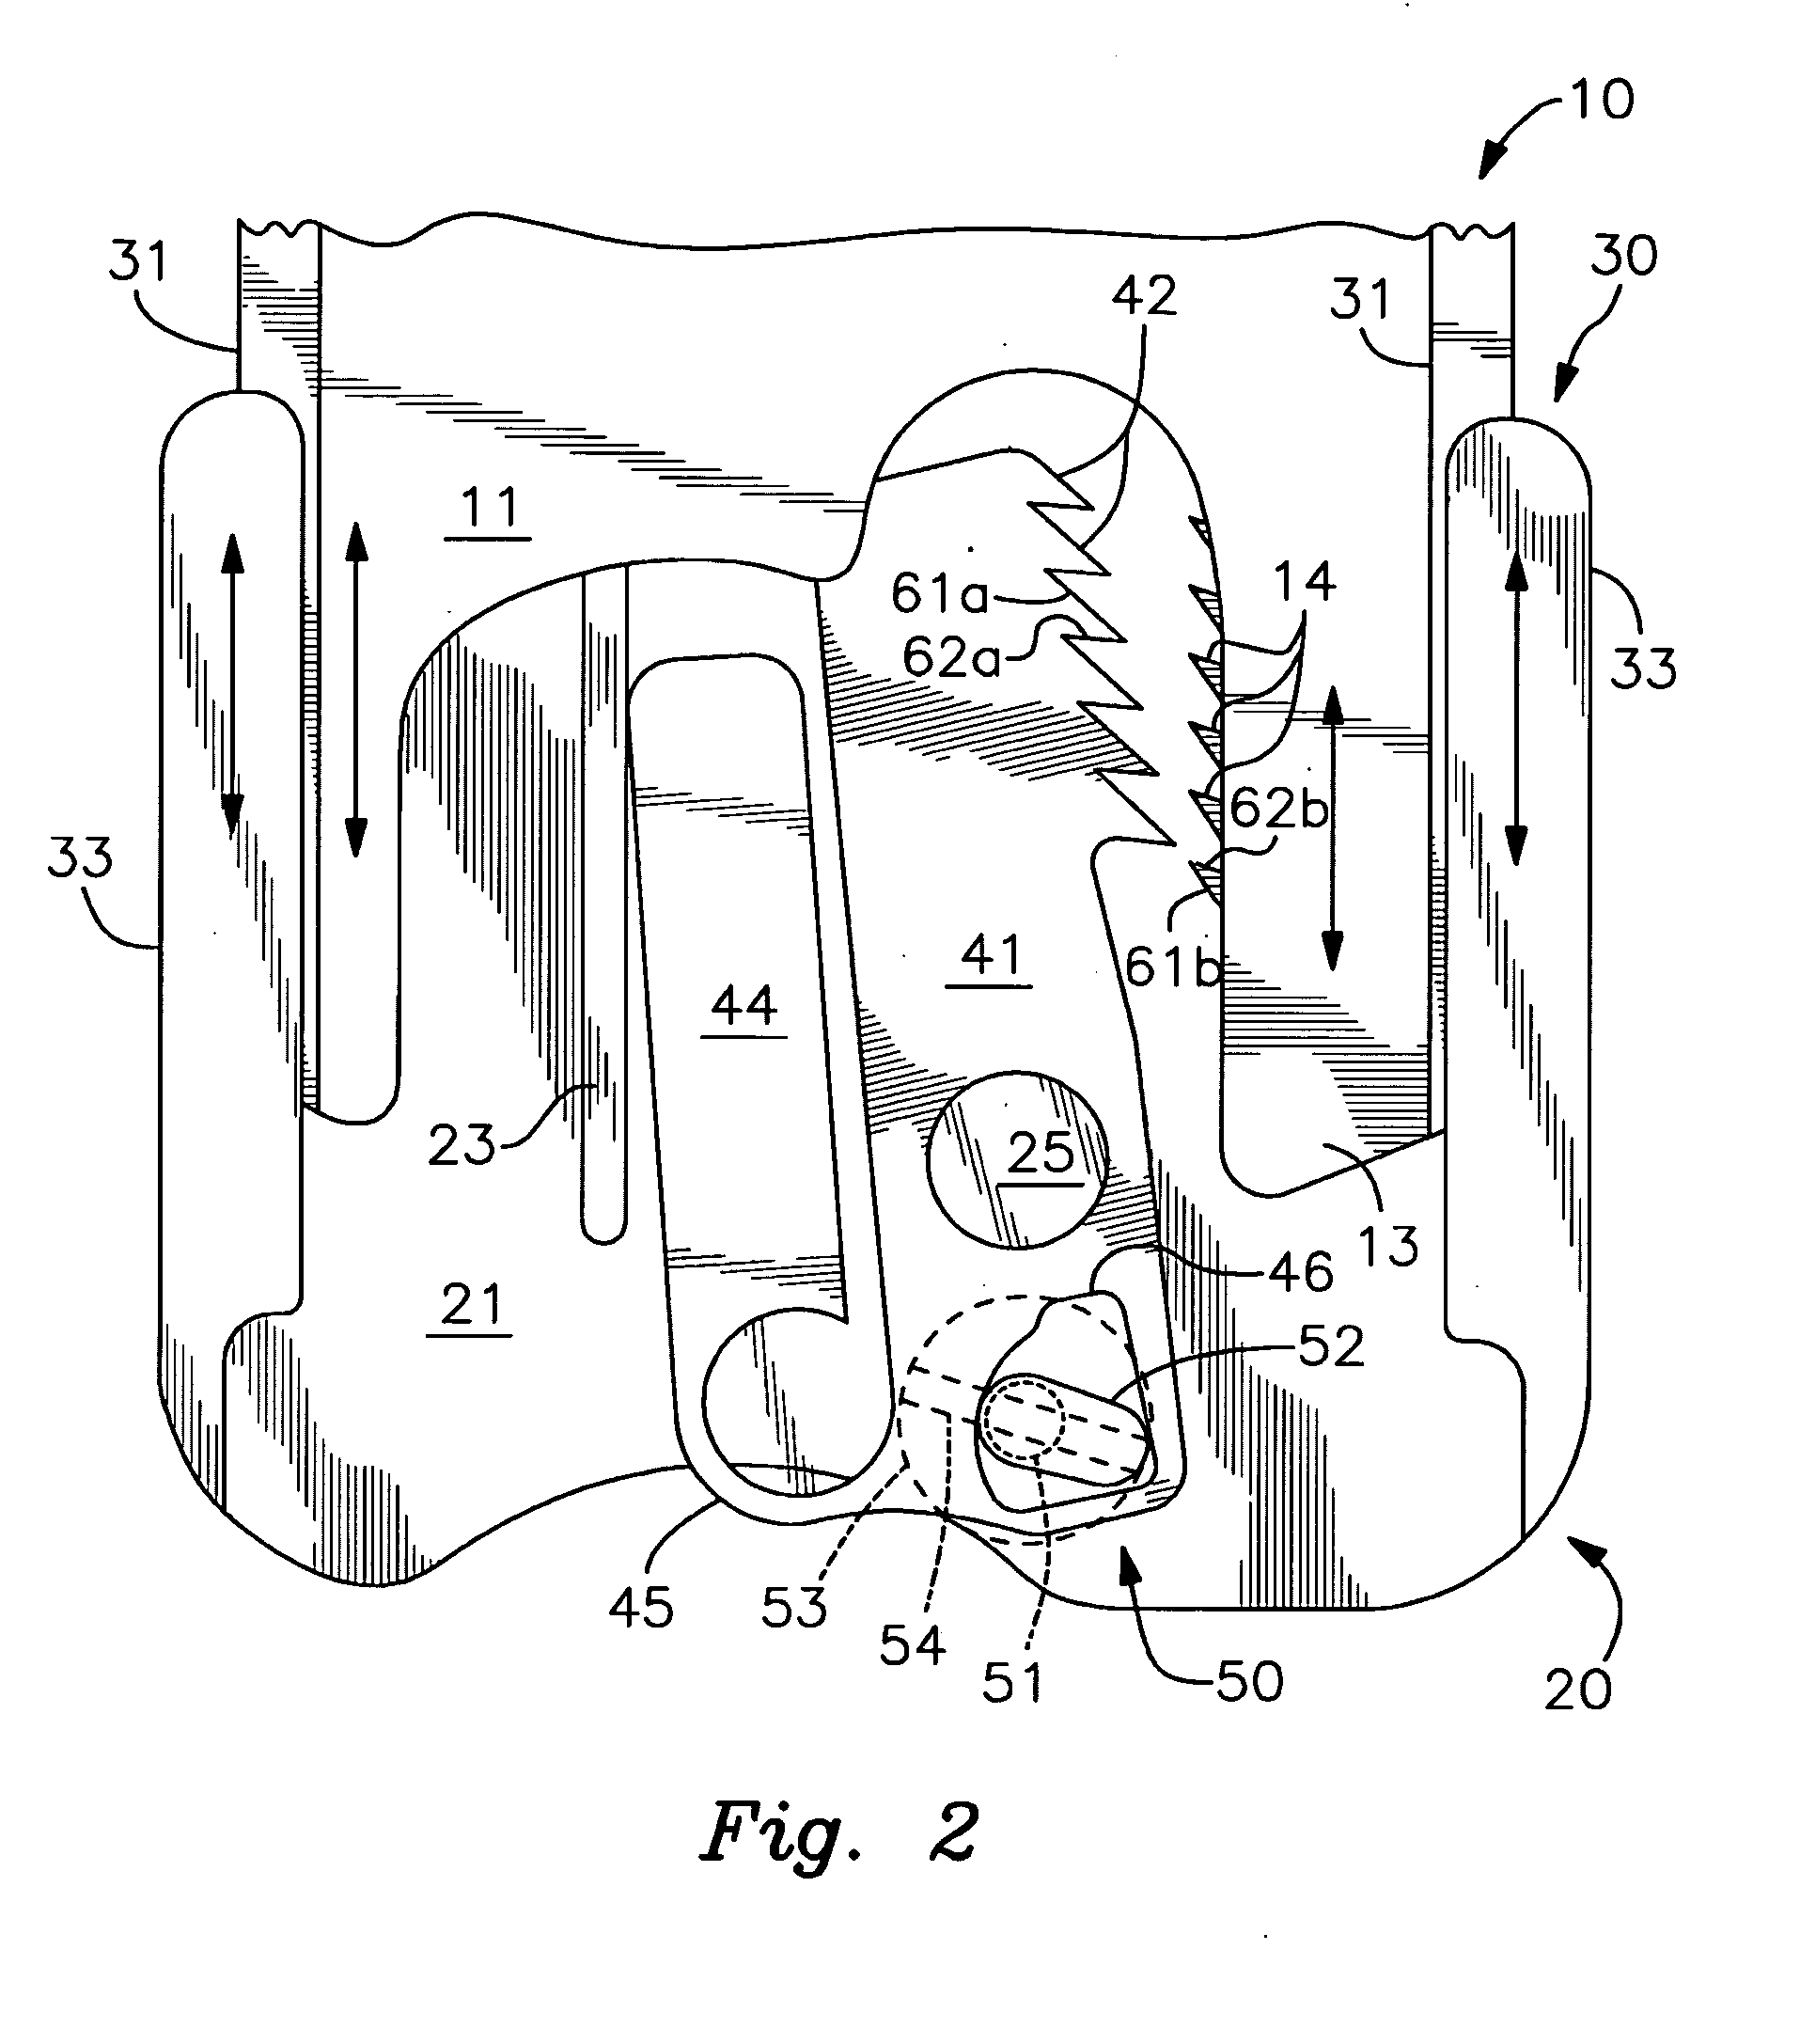 Lock and release mechanism for a sternal clamp